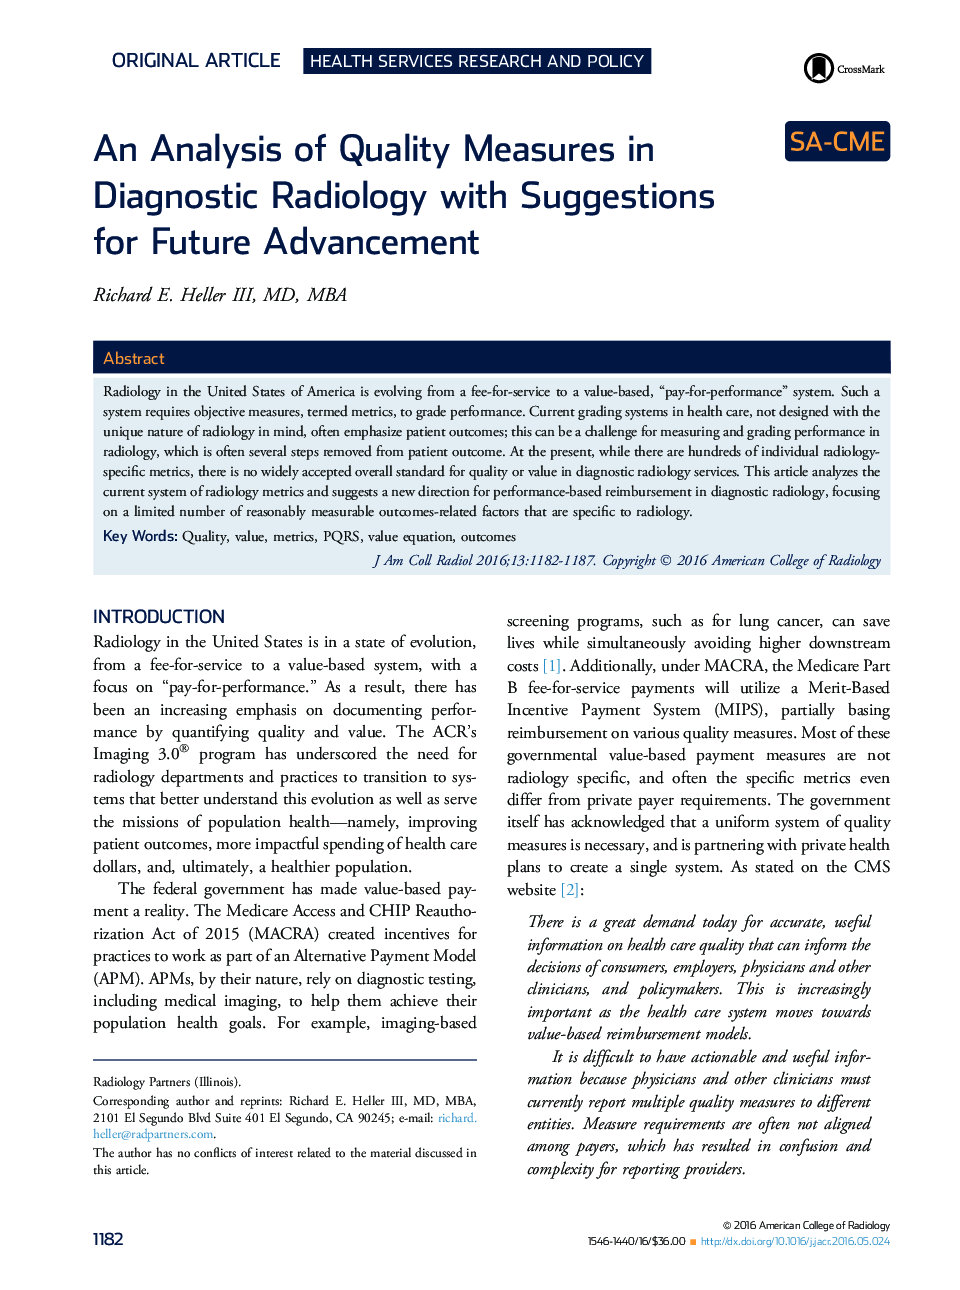 An Analysis of Quality Measures in Diagnostic Radiology with Suggestions for Future Advancement